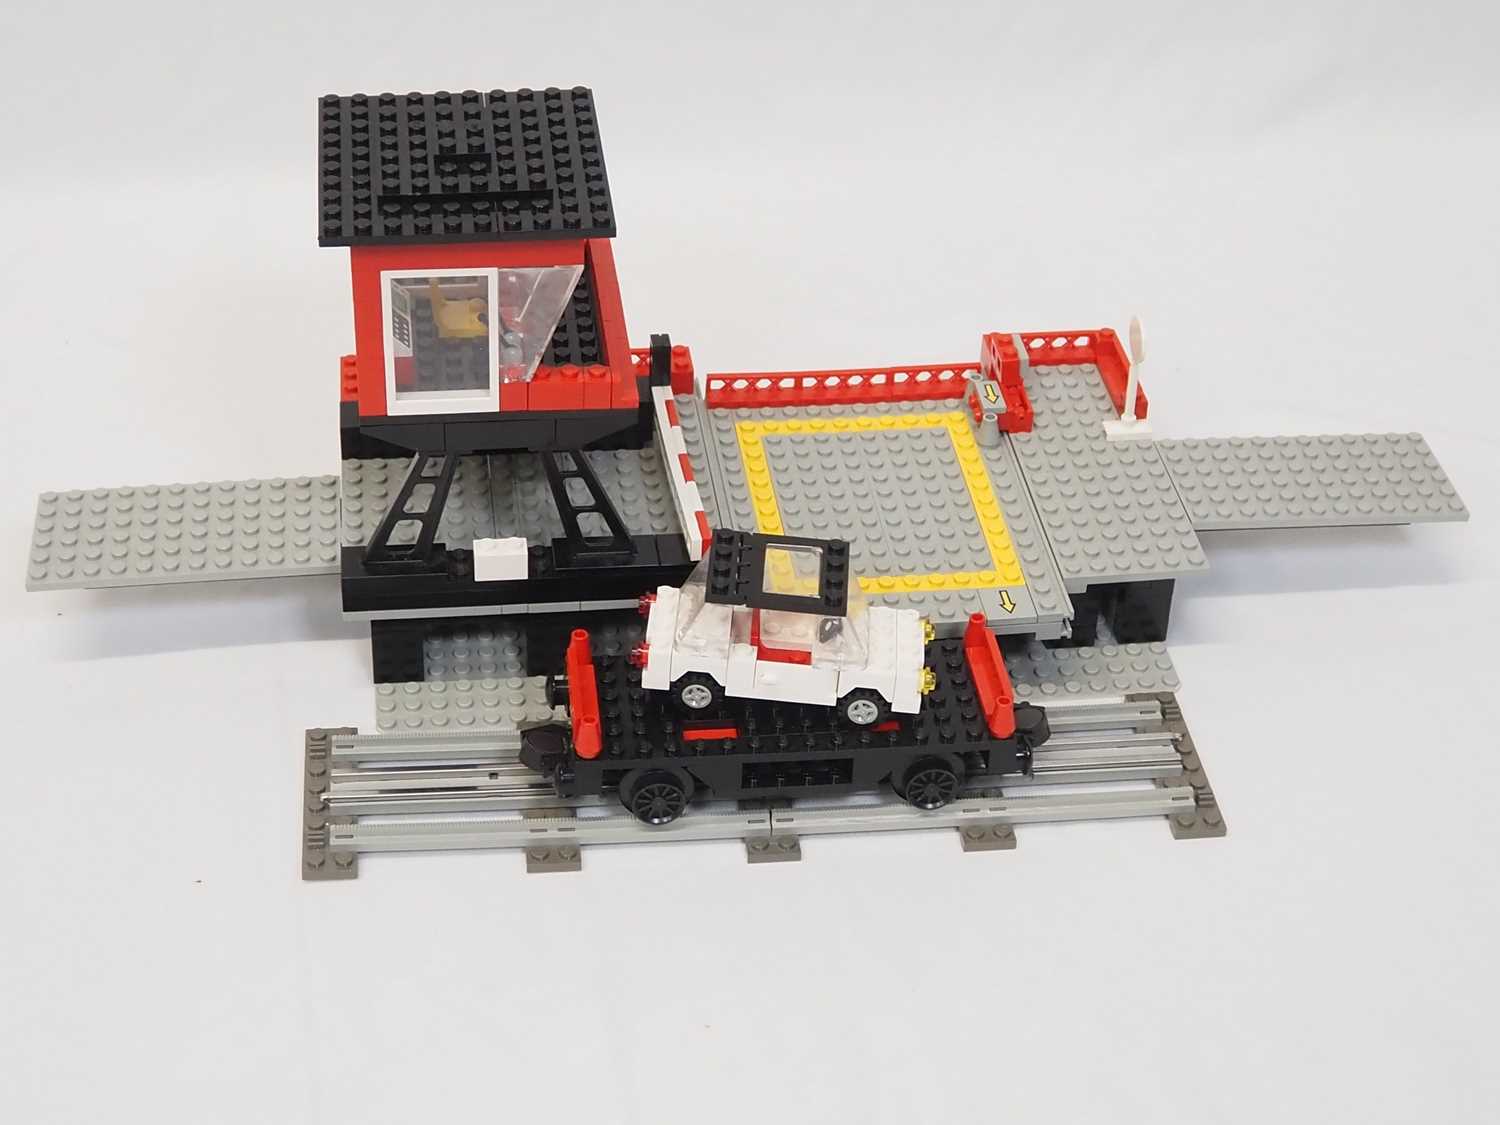 LEGO - TRAIN #7839 - 12v Car Transport Depot - Some parts with internal box, printed instructions no - Image 3 of 3